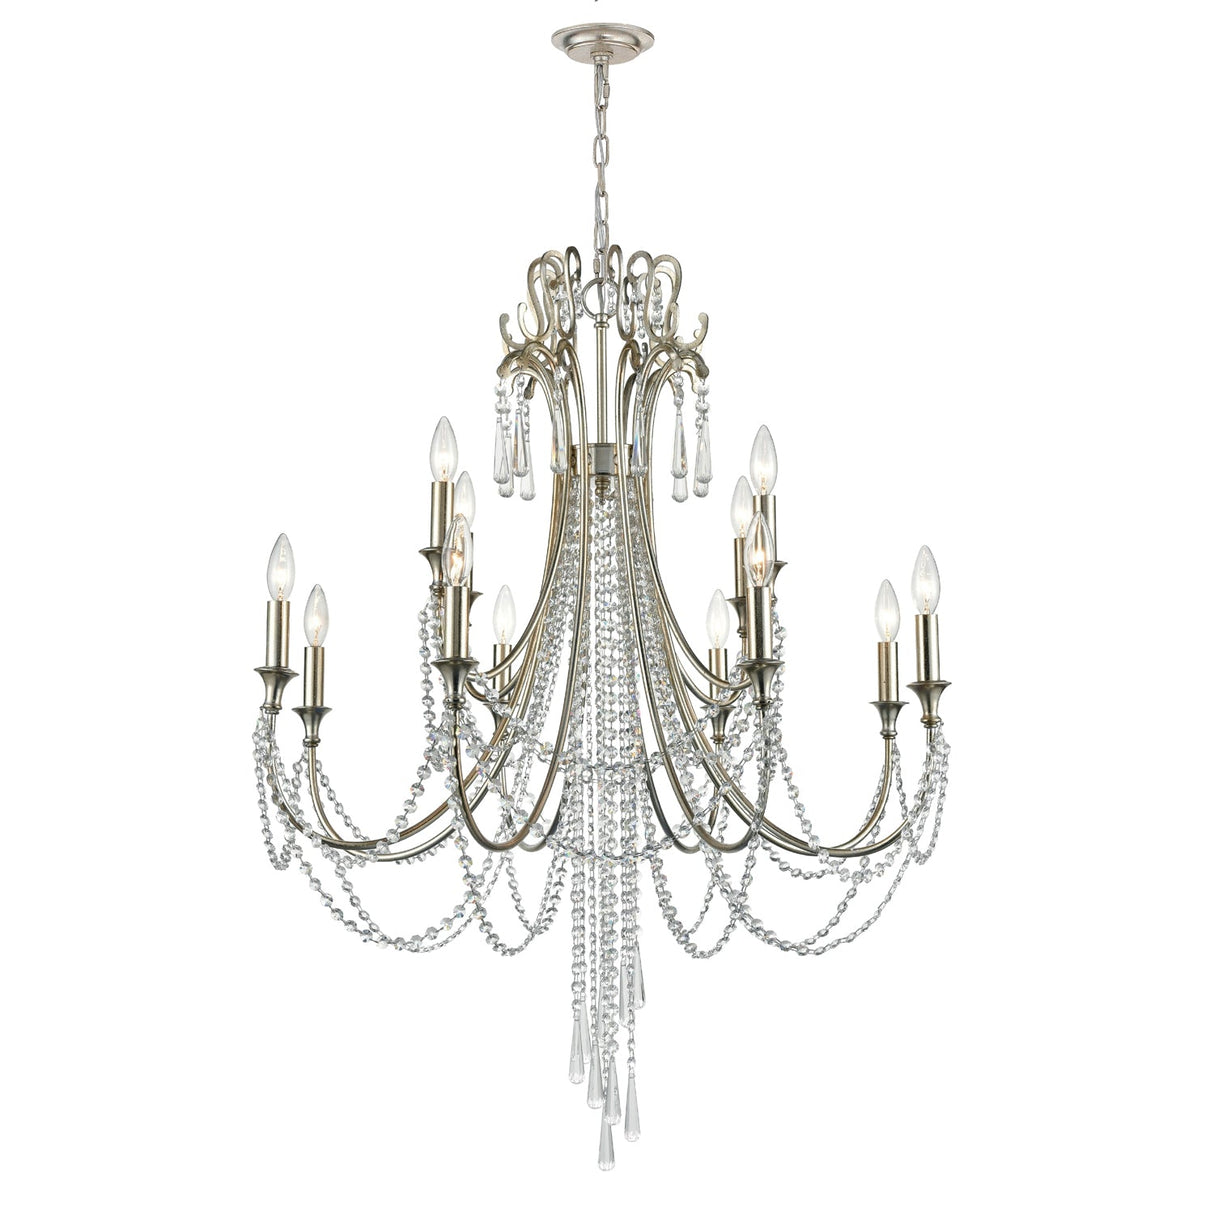 Arcadia 12 Light Antique Silver Chandelier ARC-1909-SA-CL-MWP